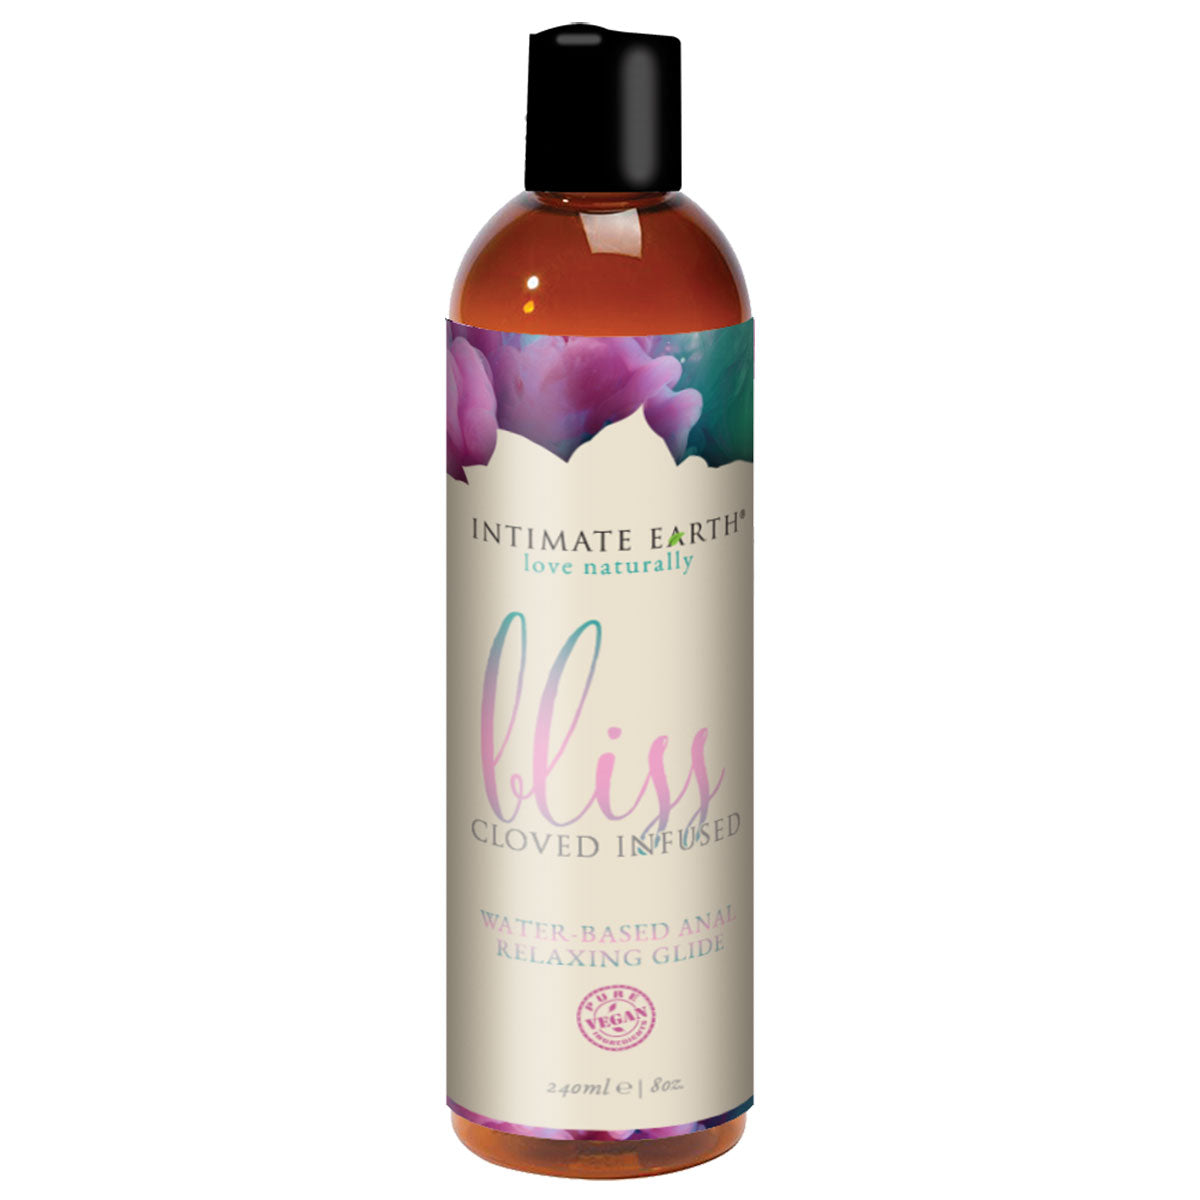 Intimate Earth Bliss Water-Based Anal Relaxing Serum